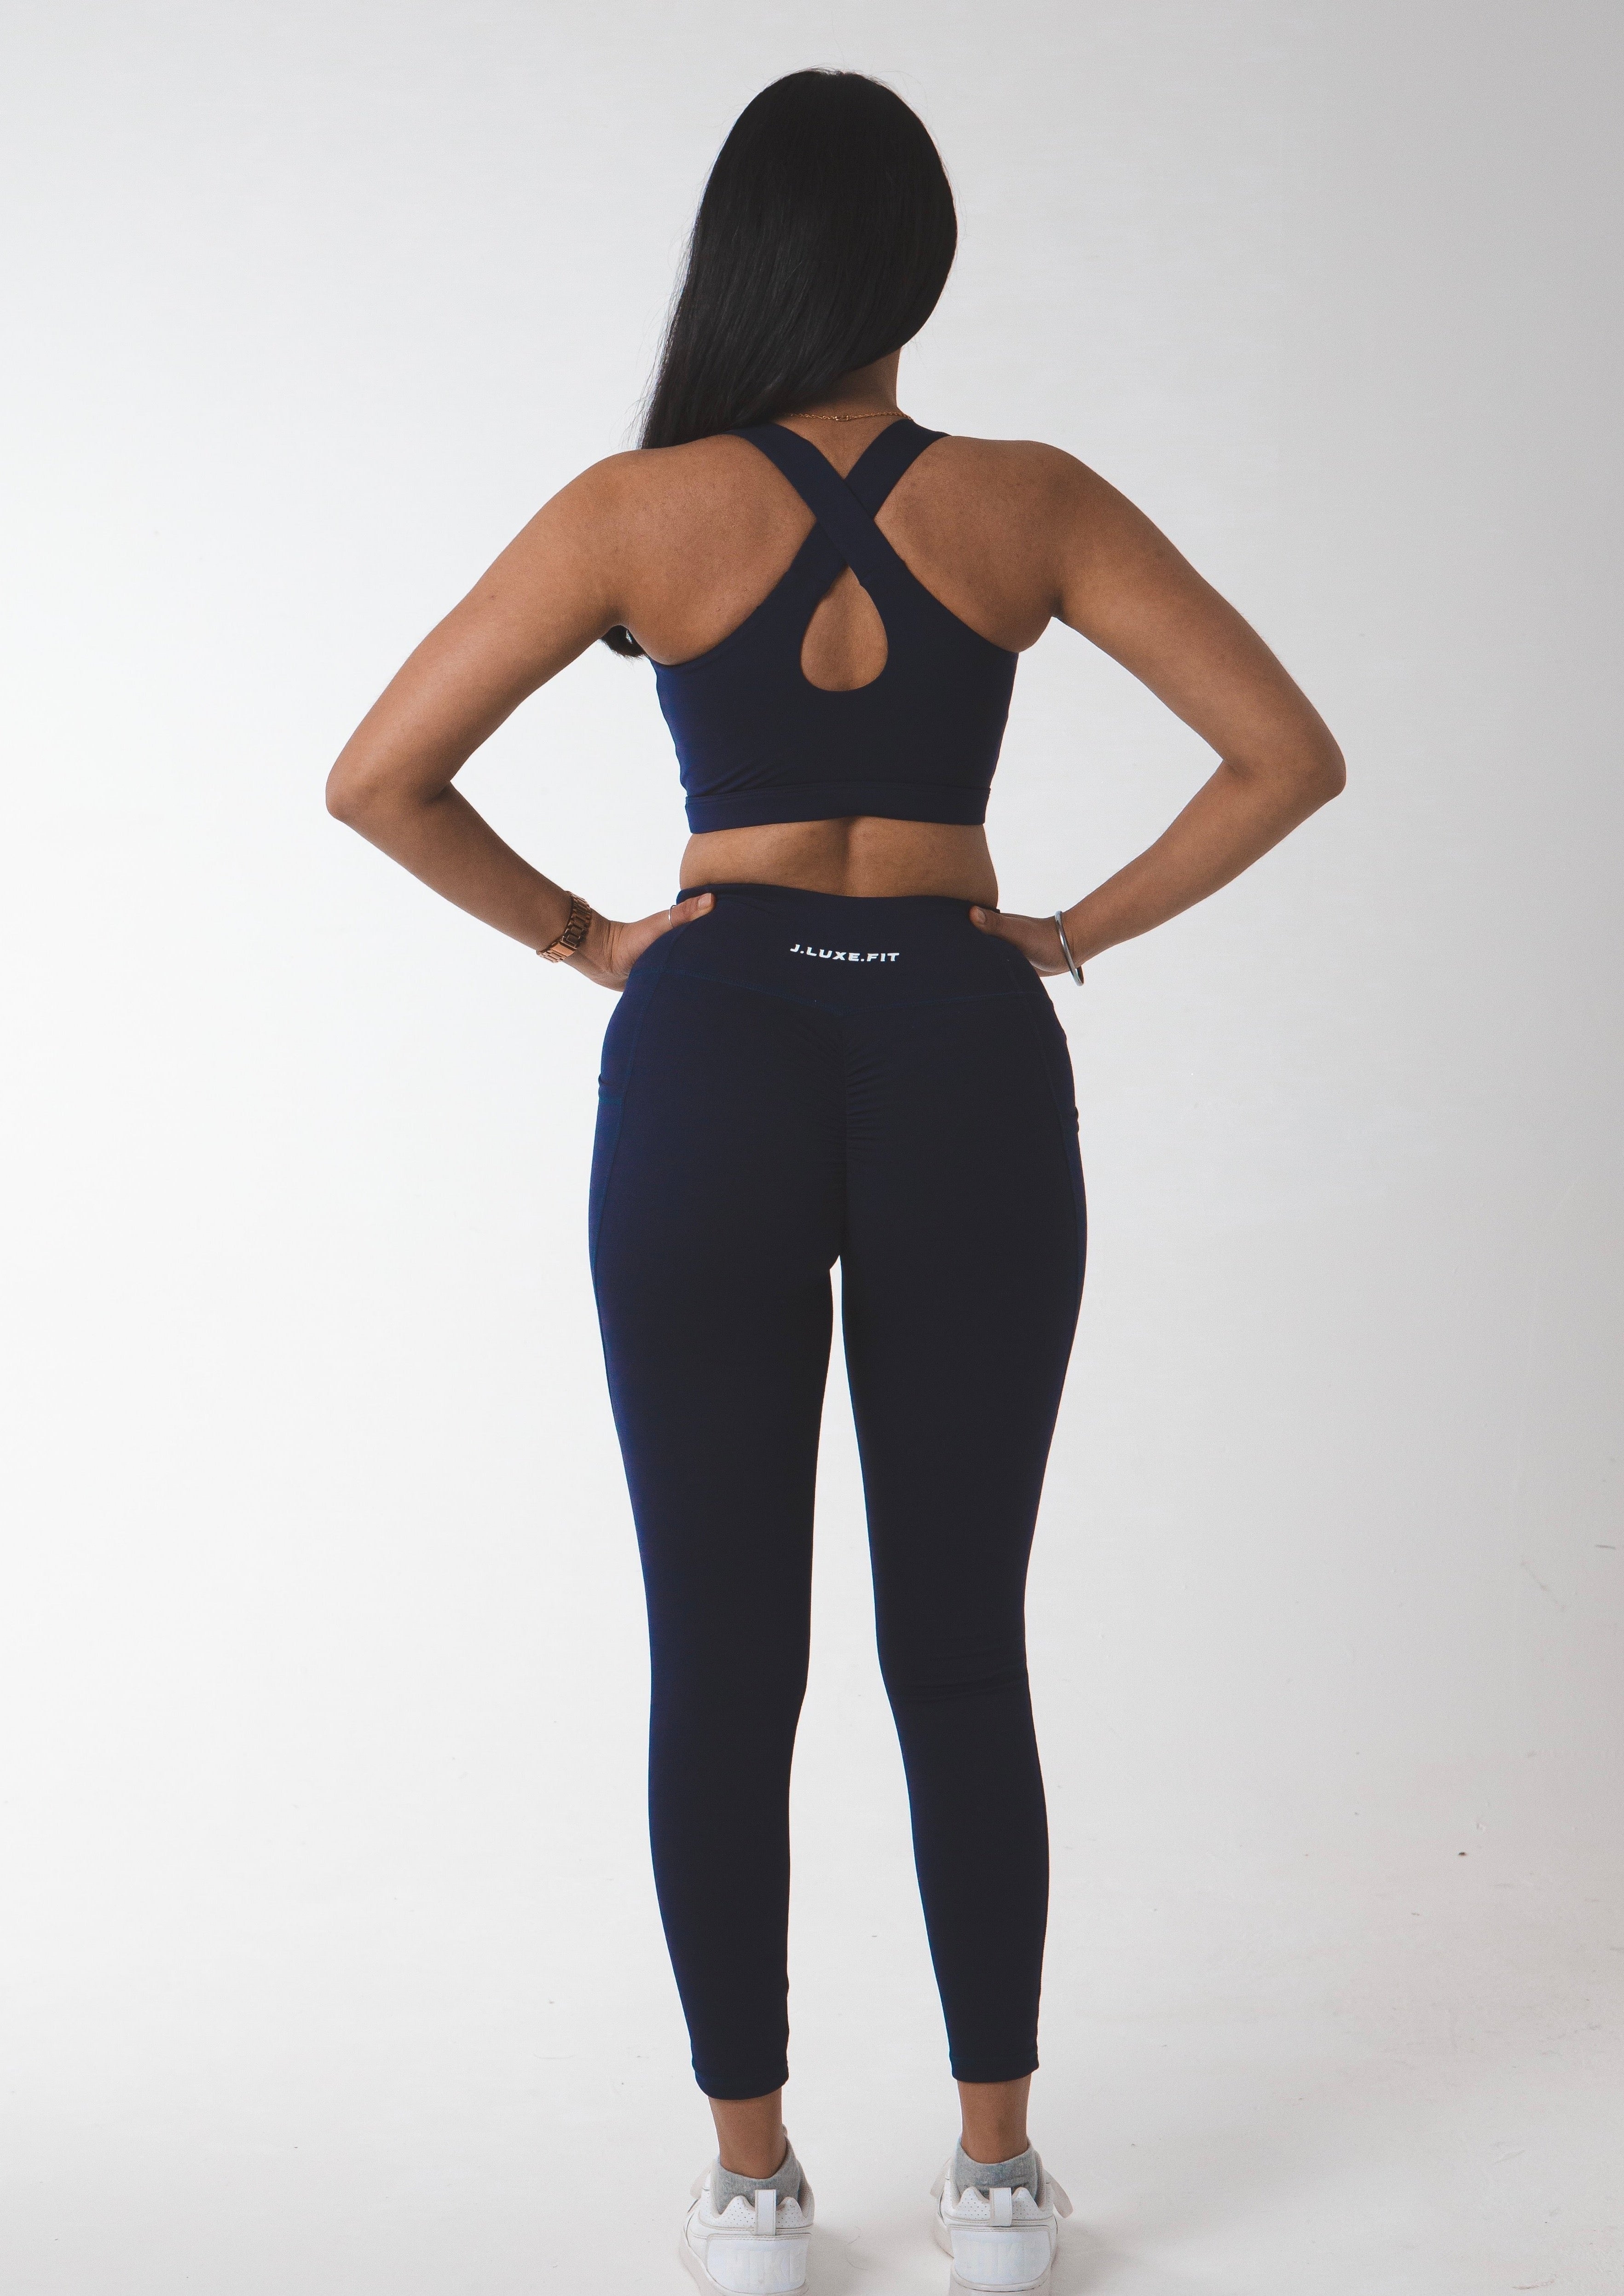 Luxe Support Navy Sports Bra - J.LUXE.FIT